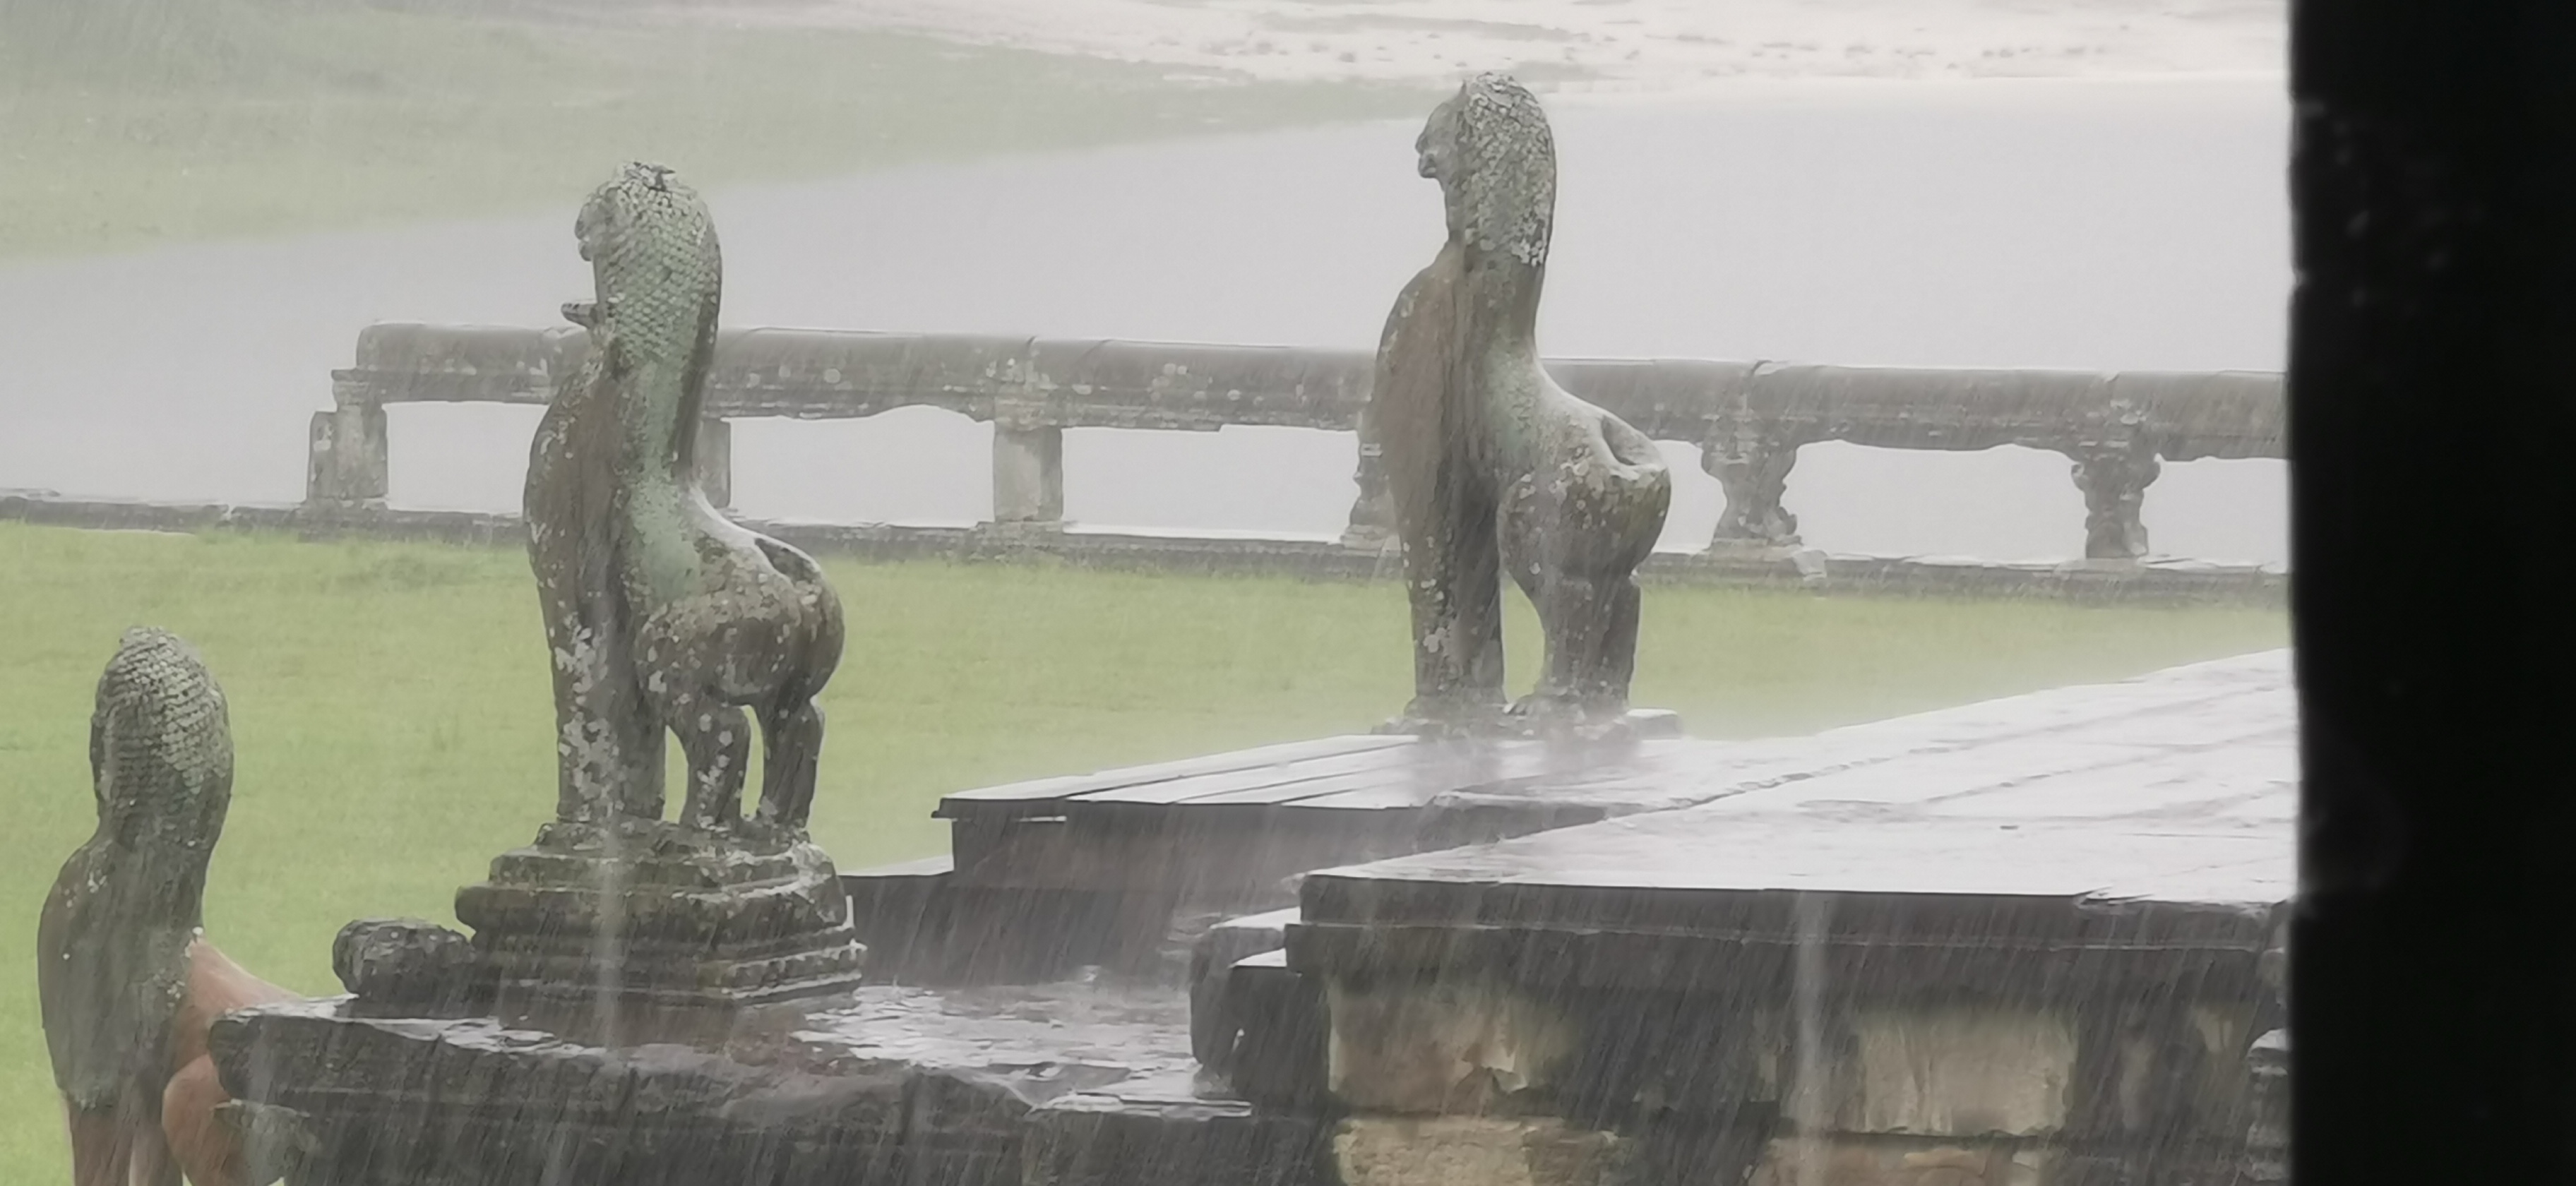 Rain falls on the sculptures at Angkor Archaeological Park in Siem Reap, Cambodia. /CGTN